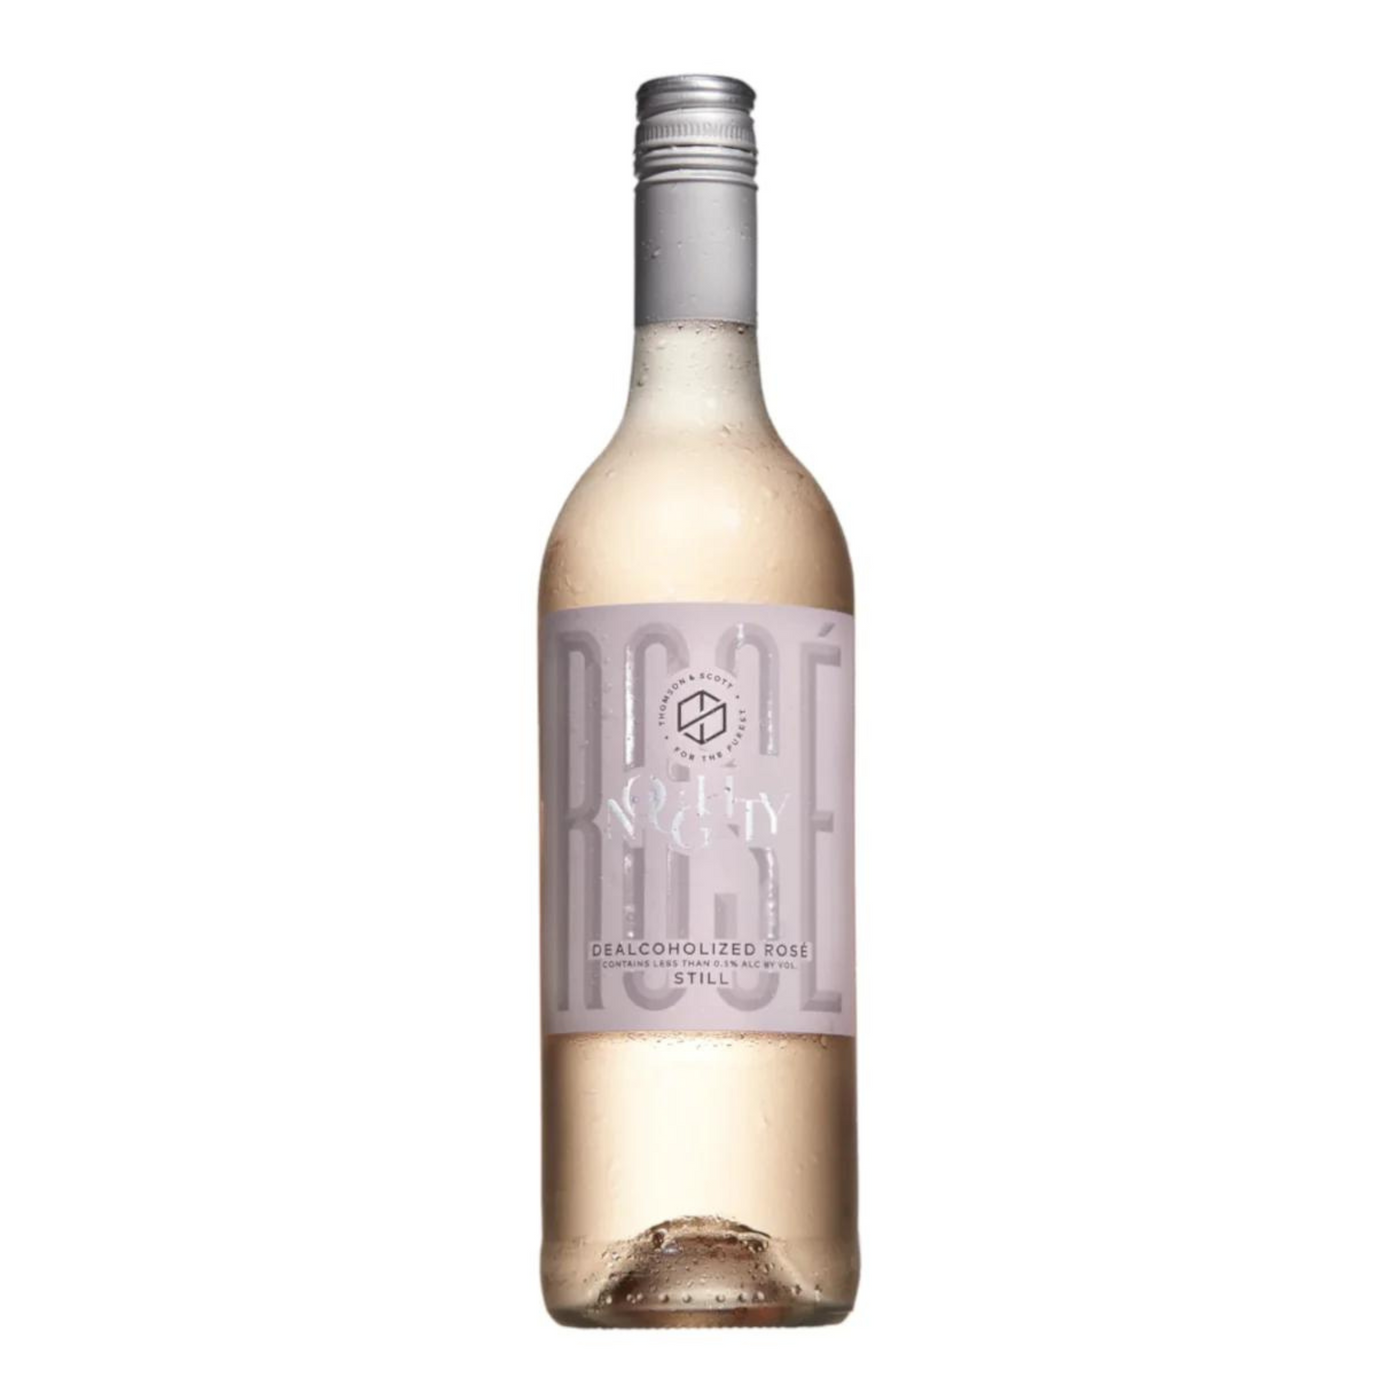 Thomson & Scott Noughty Non Alcohol Rose 75cl